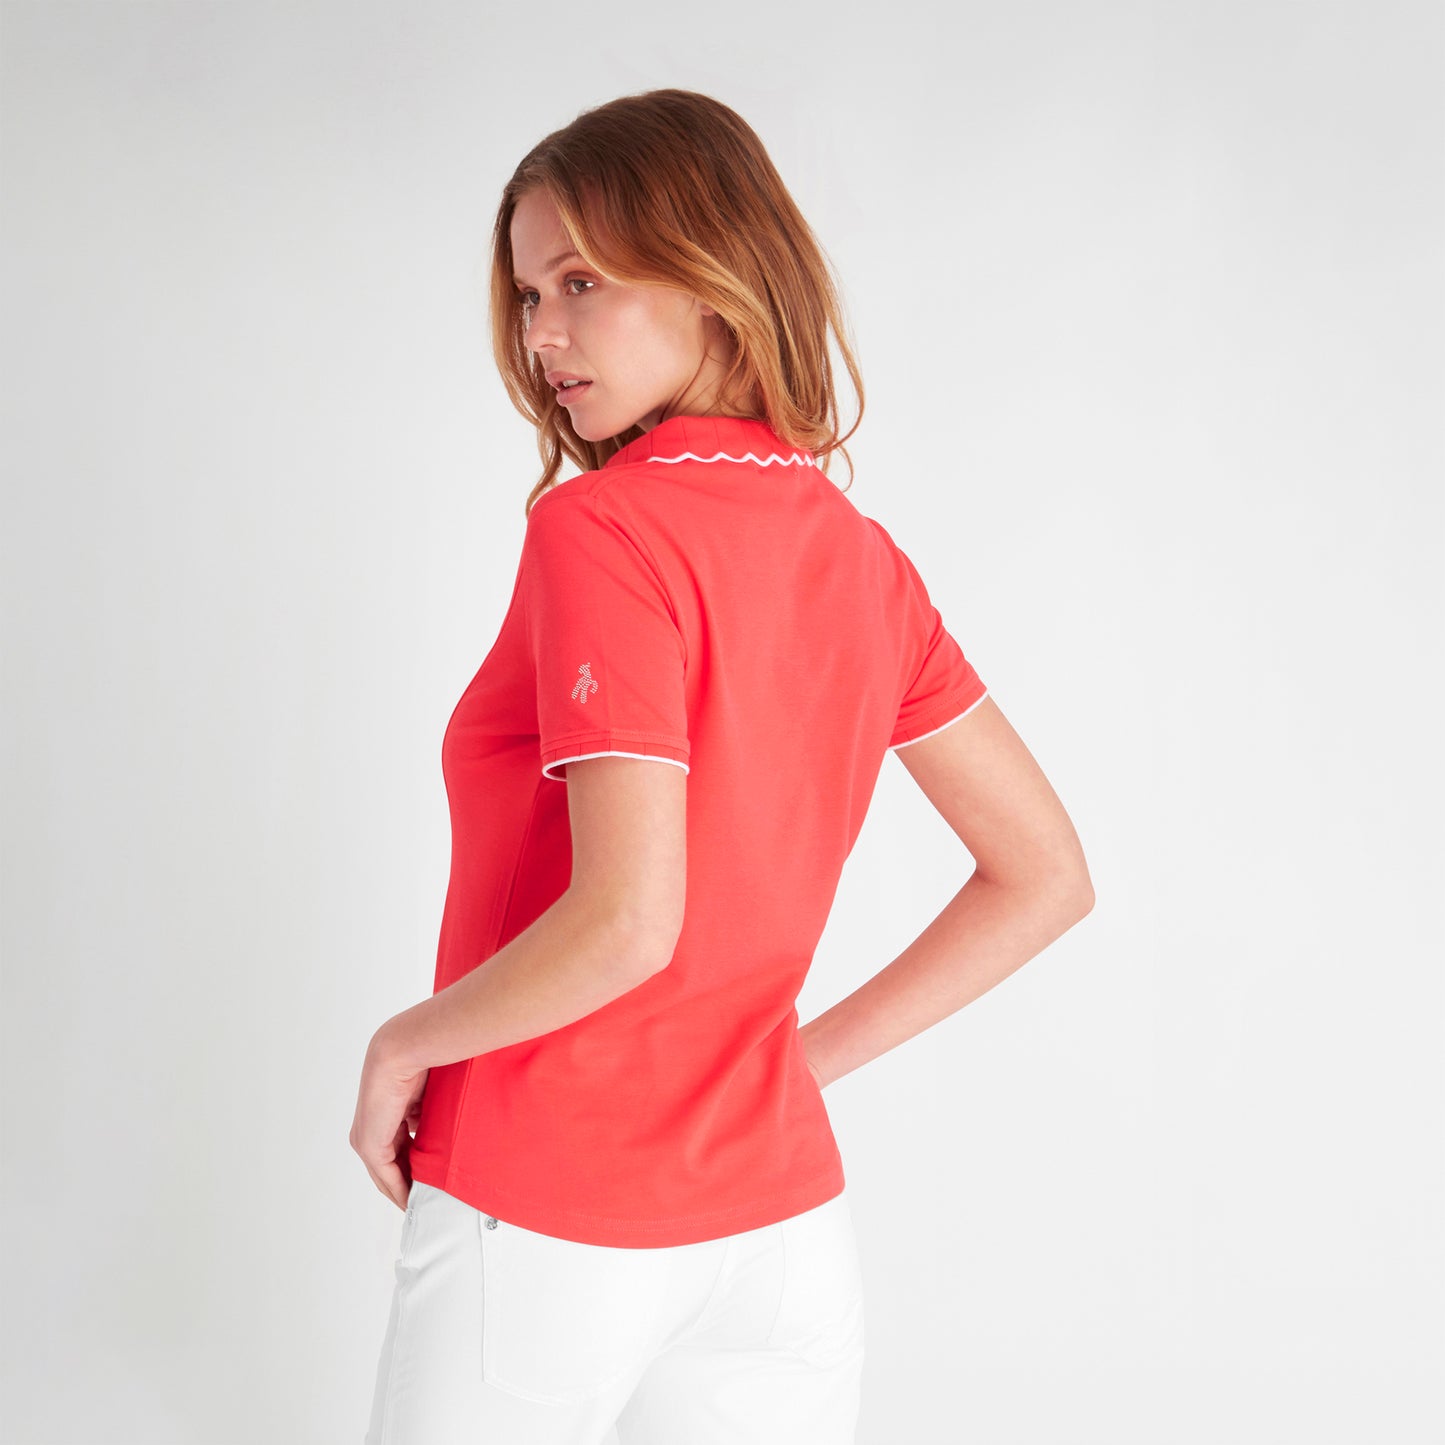 Green Lamb Ladies Short Sleeve Polo with Scalloped Collar in Poppy